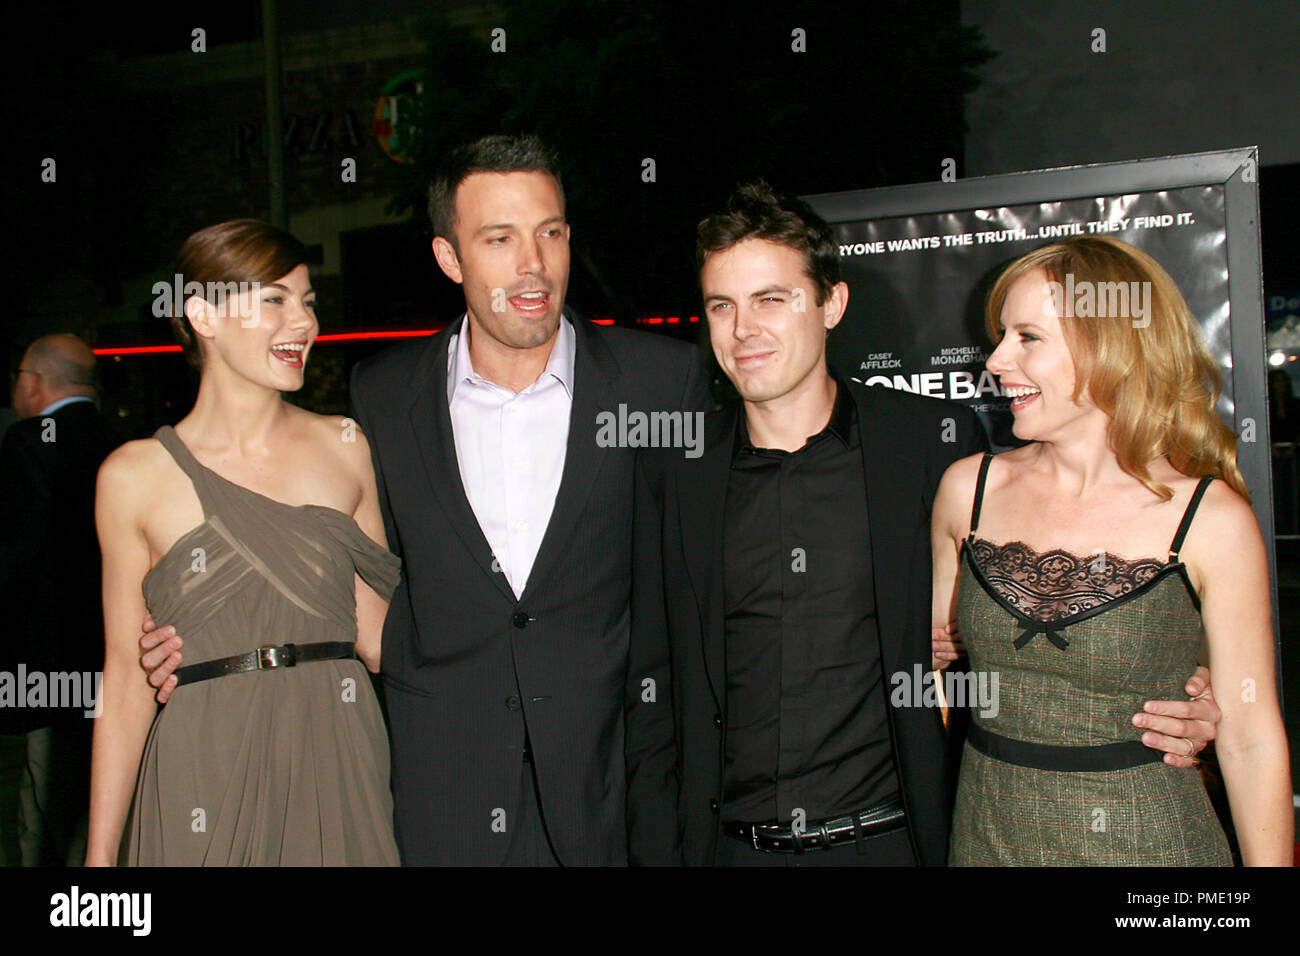 'Gone, Baby, Gone' (Premiere) Michelle Monaghan, Ben Affleck, Casey Affleck, Amy Ryan  10-8-2007 / Bruin Theatre / Westwood, CA / Miramax Films / Photo by Joseph Martinez File Reference # 23204 0053PLX   For Editorial Use Only -  All Rights Reserved Stock Photo